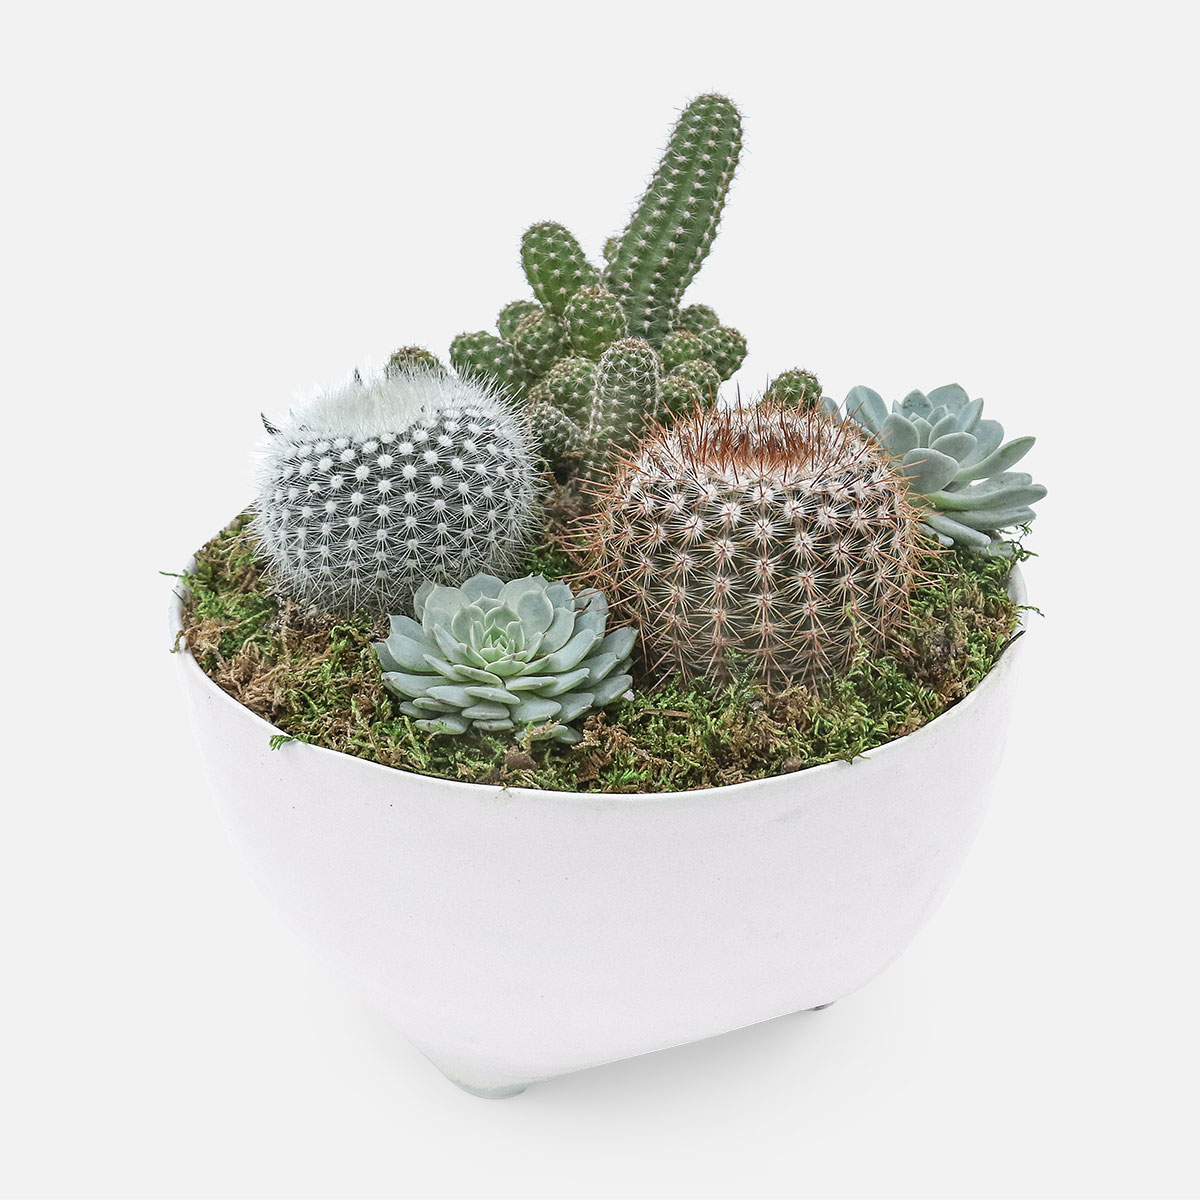 CACTI AND SUCCULENT GARDEN IN LARGE TALIAH BOWL